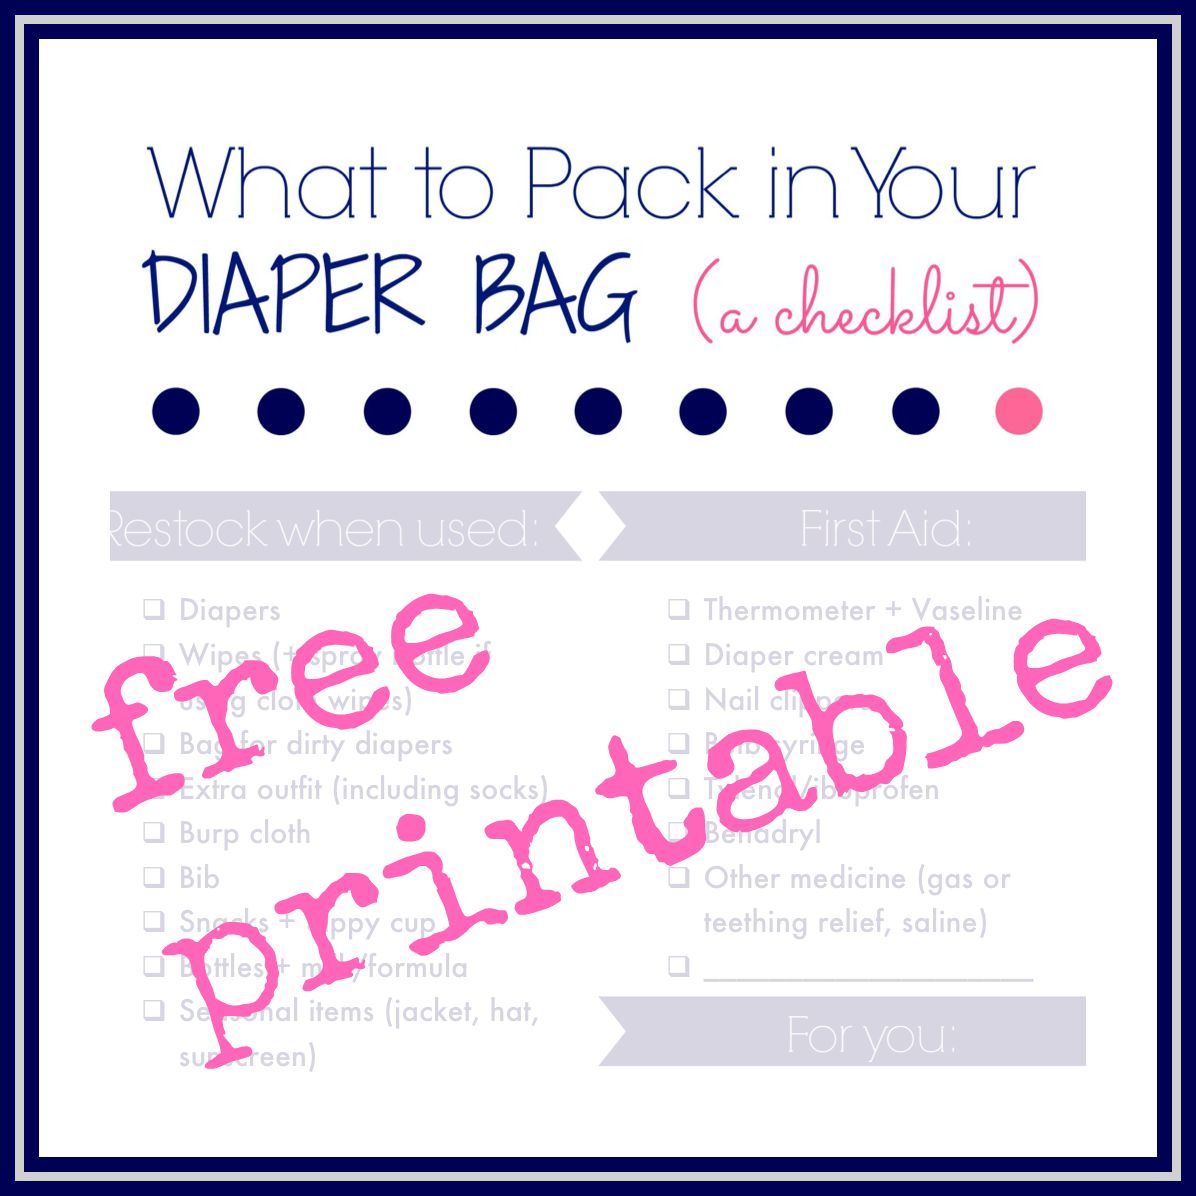 Free Printable Check List for the essentials to buy for a first